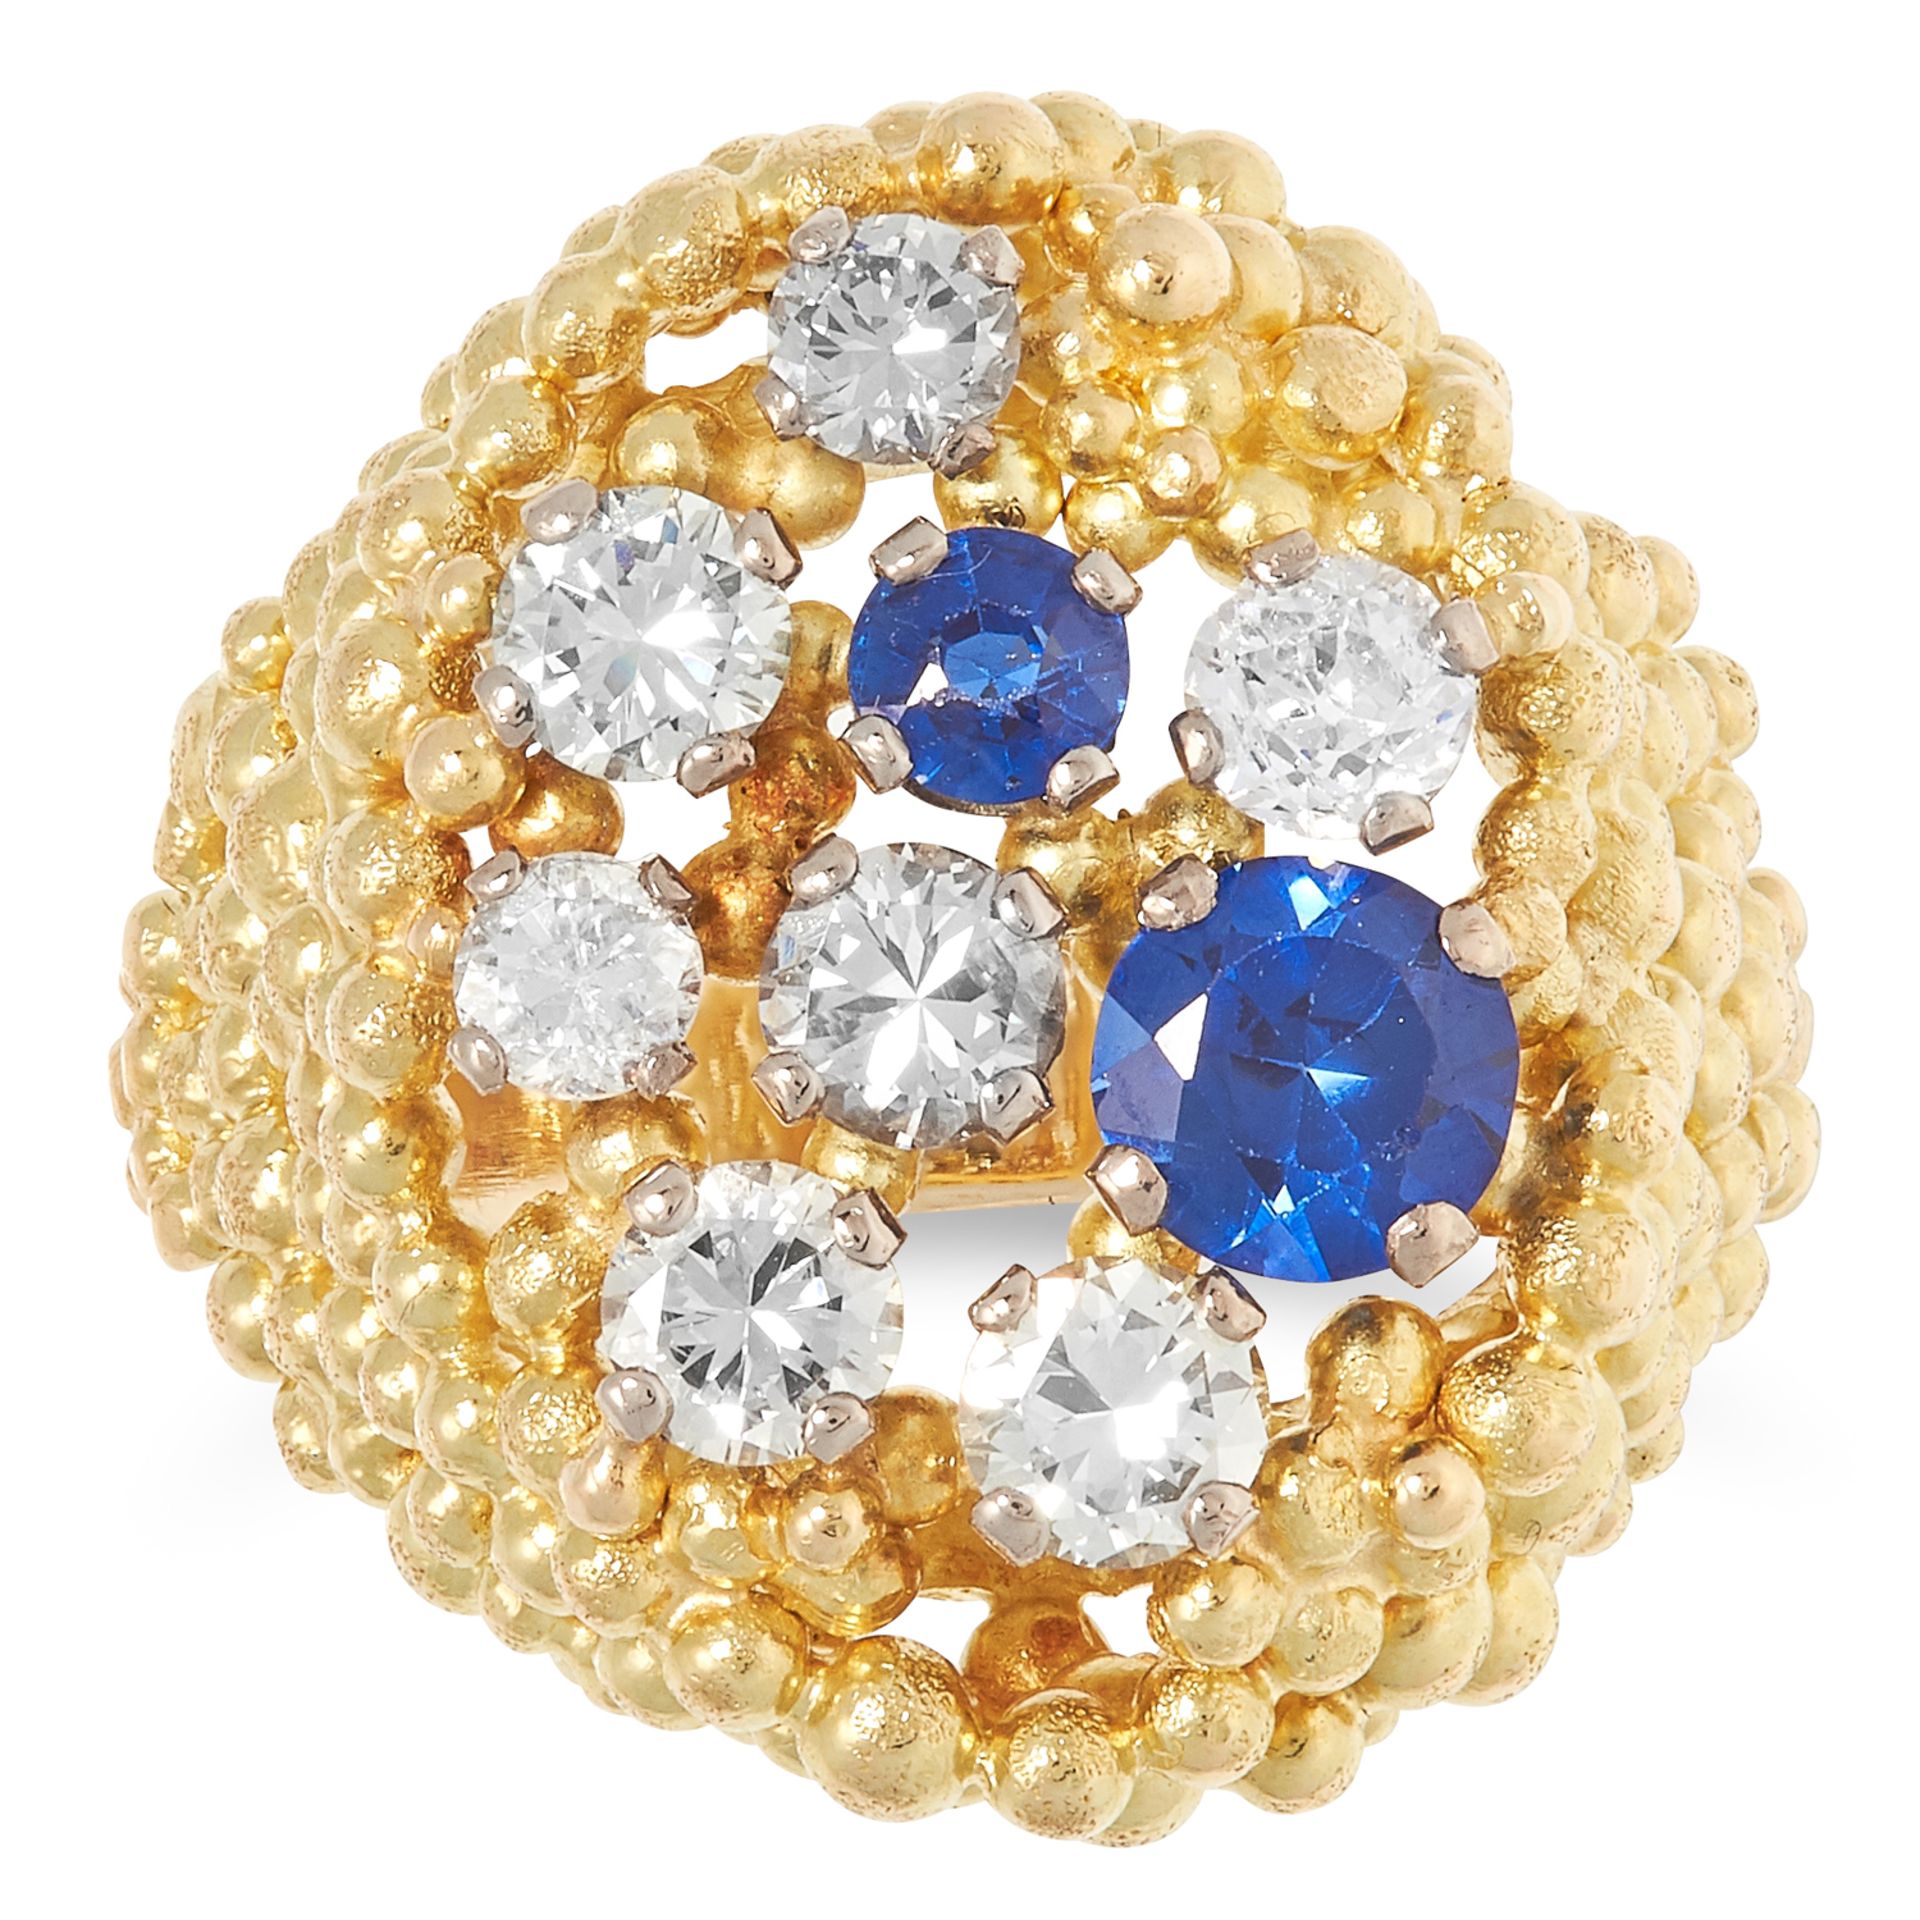 A DIAMOND AND SAPPHIRE RING, CHARLES DE TEMPLE 1972 the abstract beaded and textured design set with